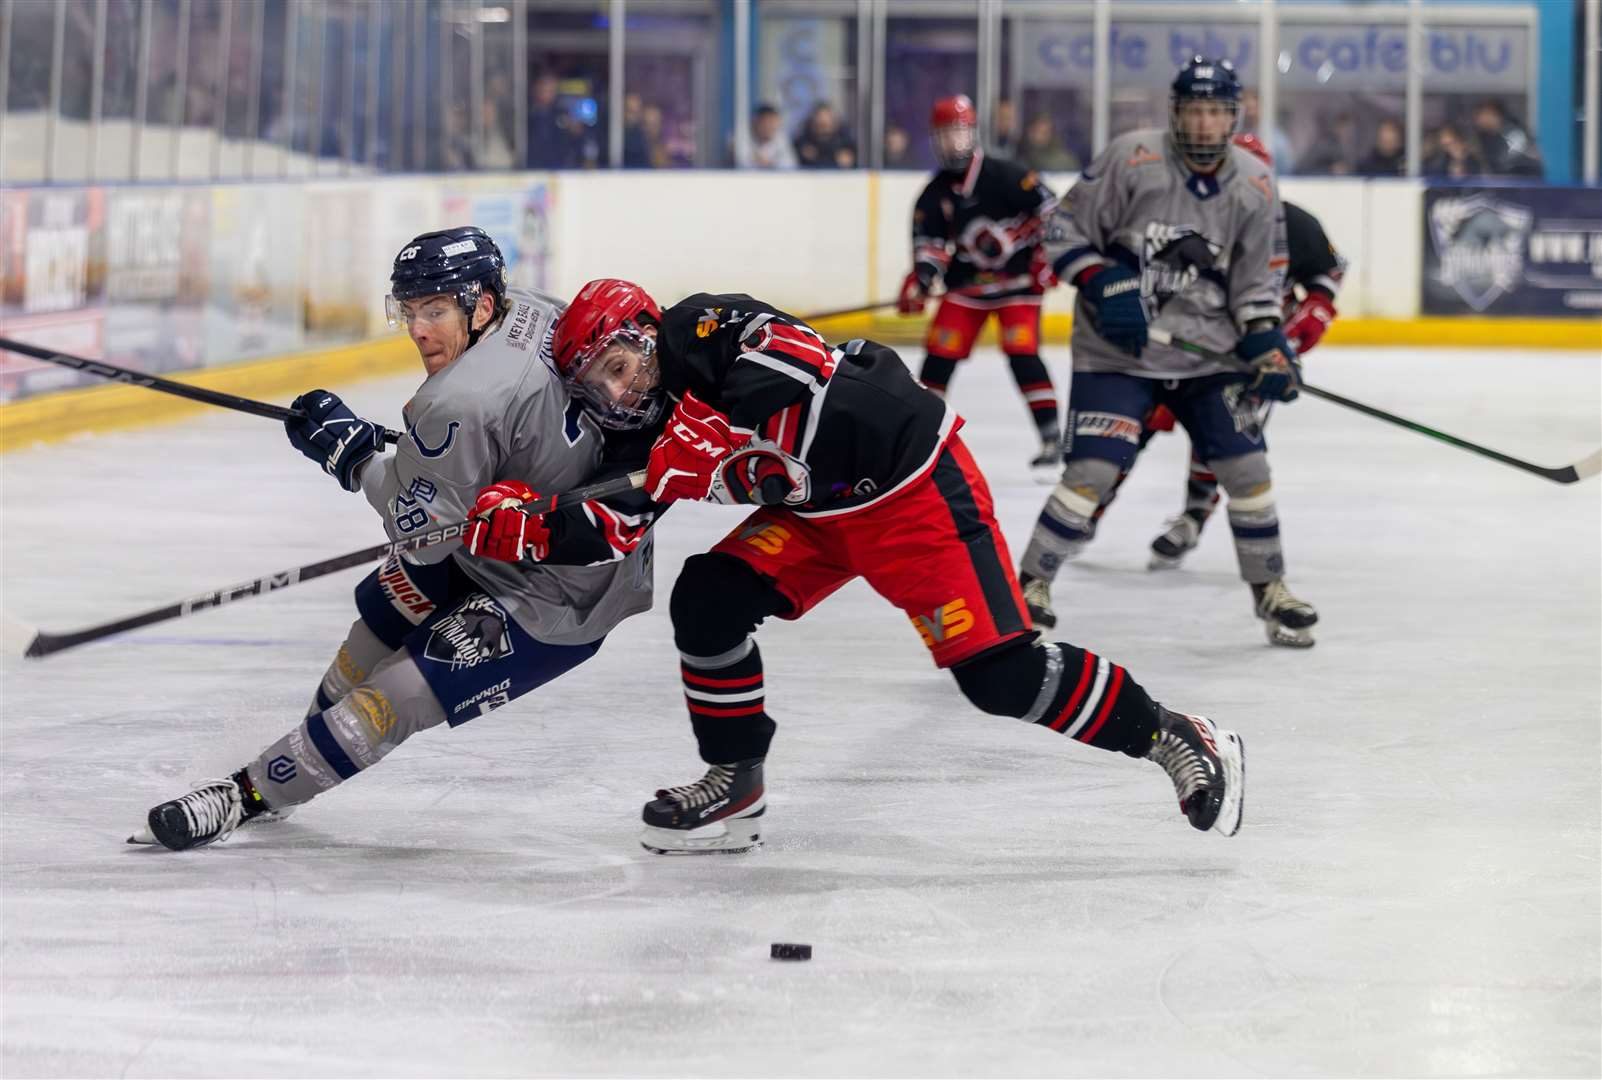 Action between Invicta Dynamos and Streatham Redhawks at Planet Ice, Gillingham Picture: David Trevallion